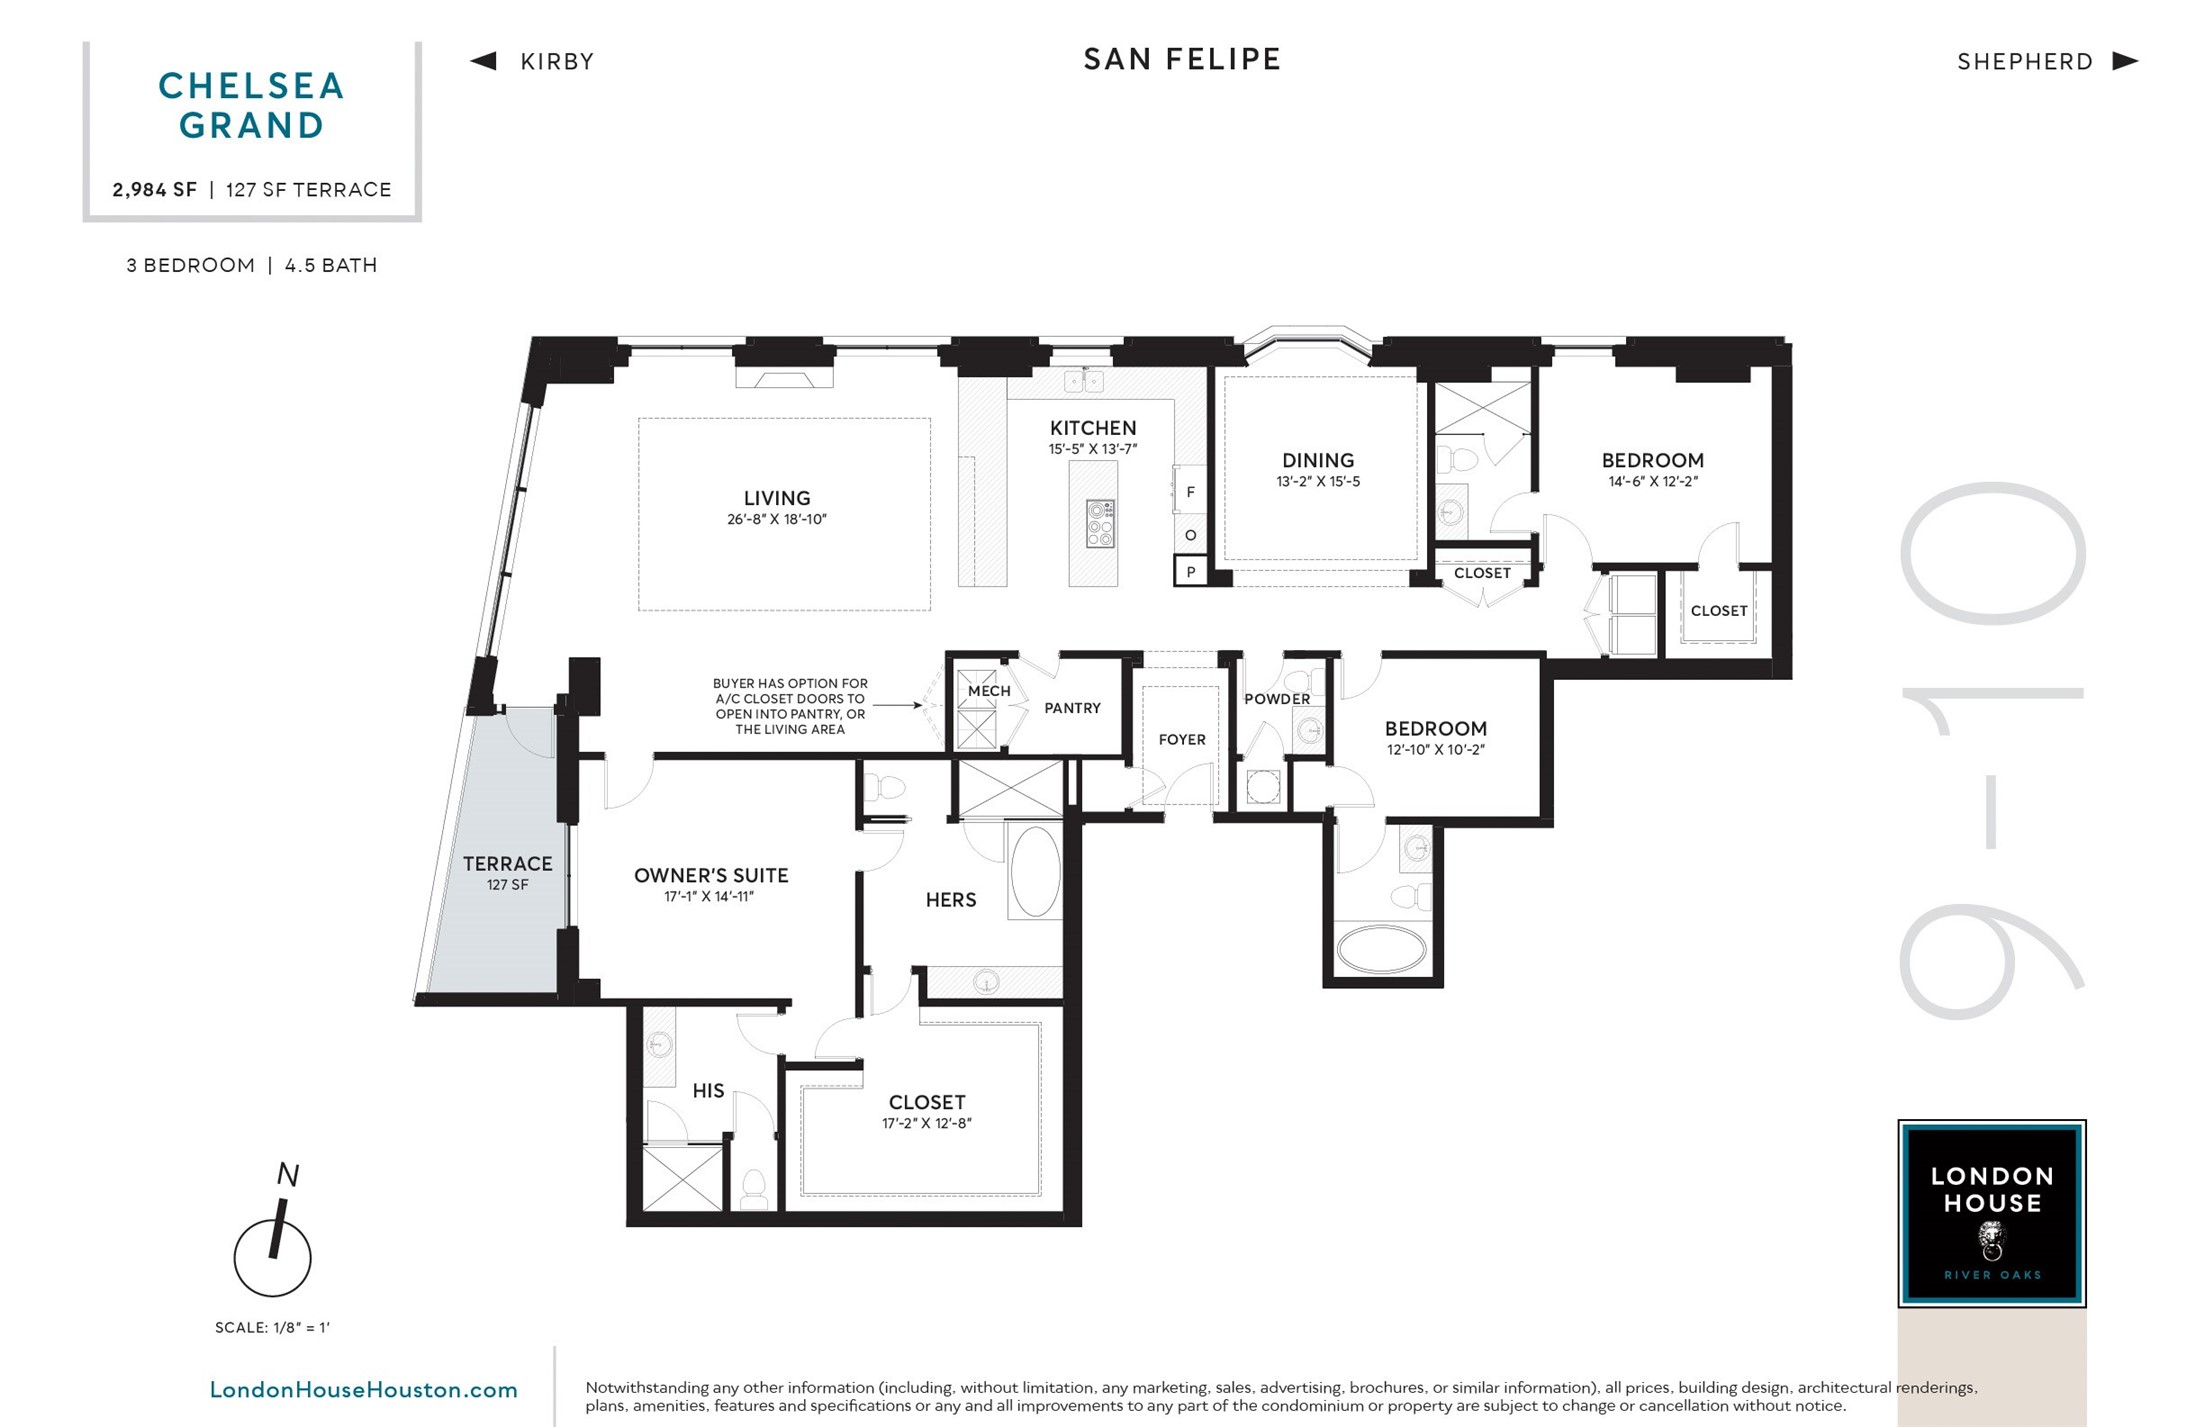 CHELSEA GRAND floor plan. Two bedrooms, two and one-half baths containing 2,984 sq.ft.